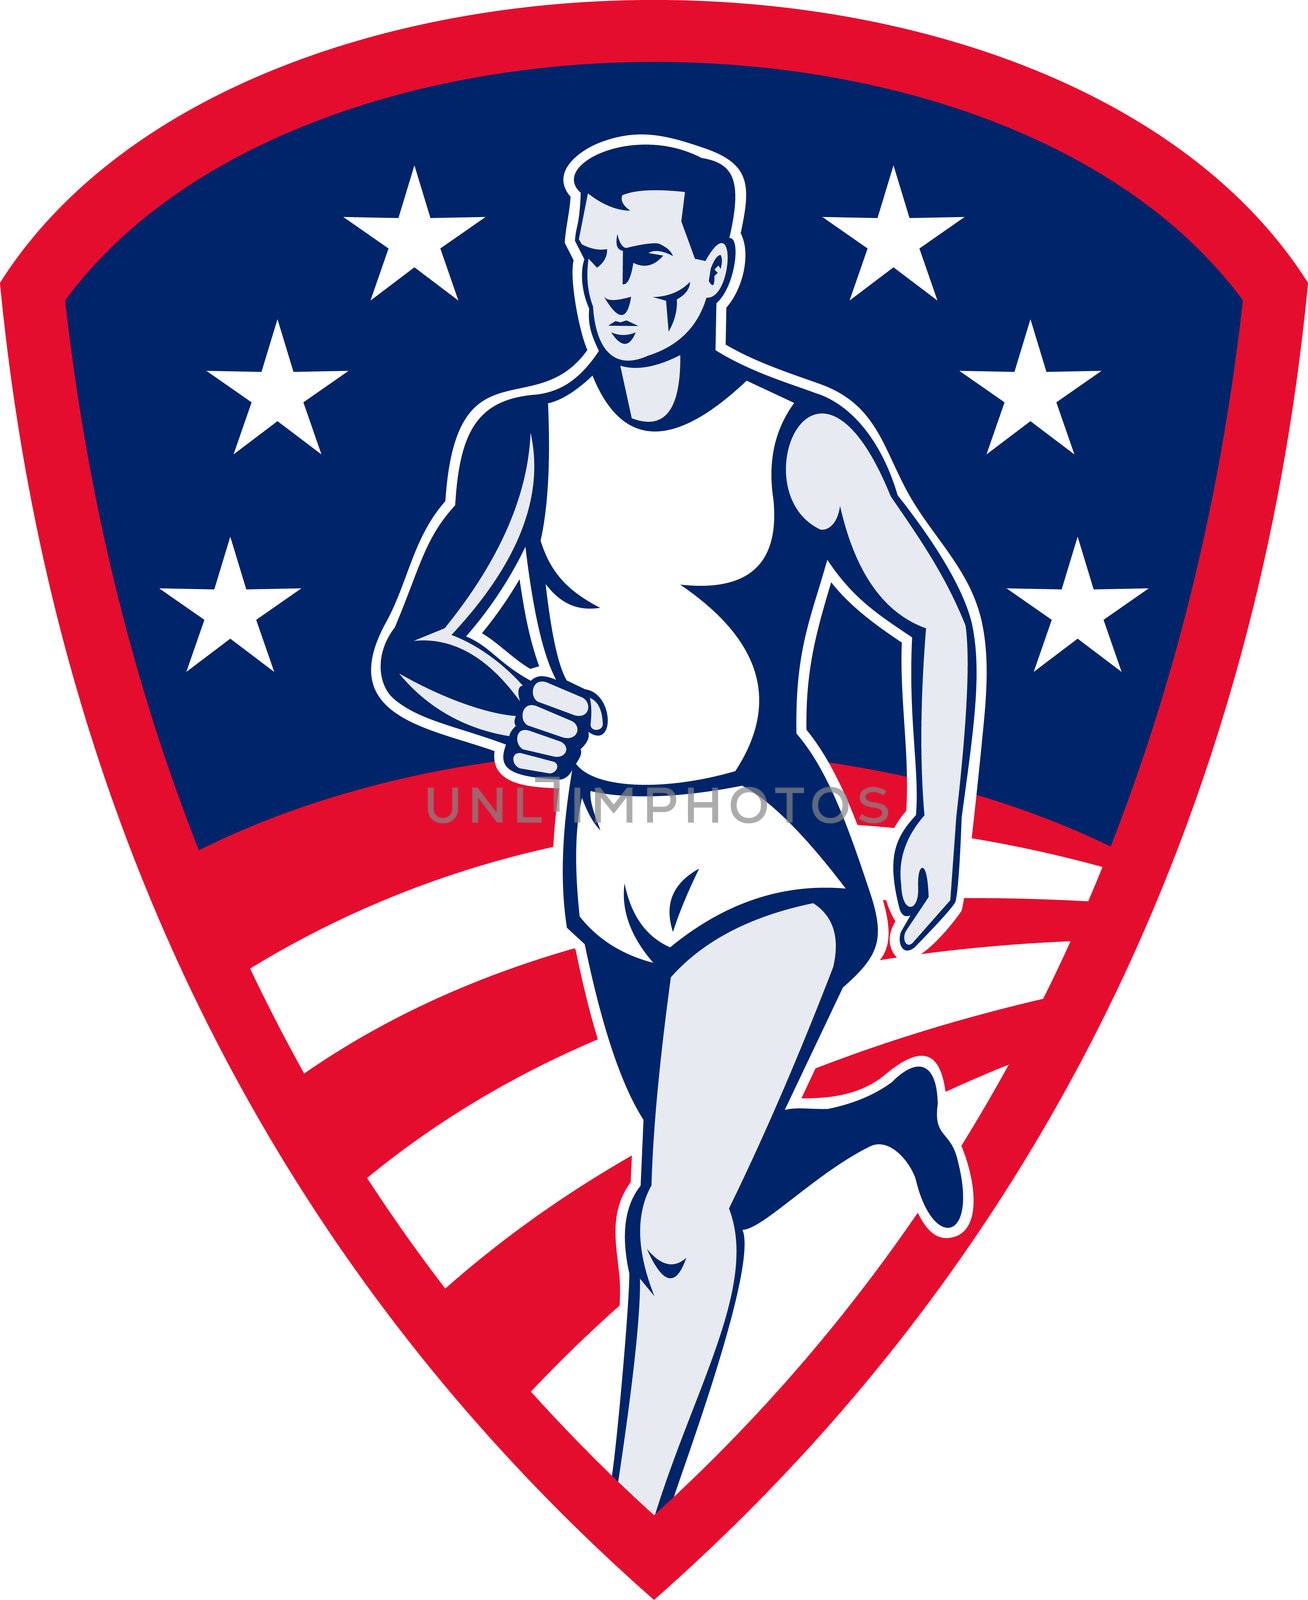 illustration of an American Marathon athlete sports runner with stars and stripes and set in shield done in retro style.